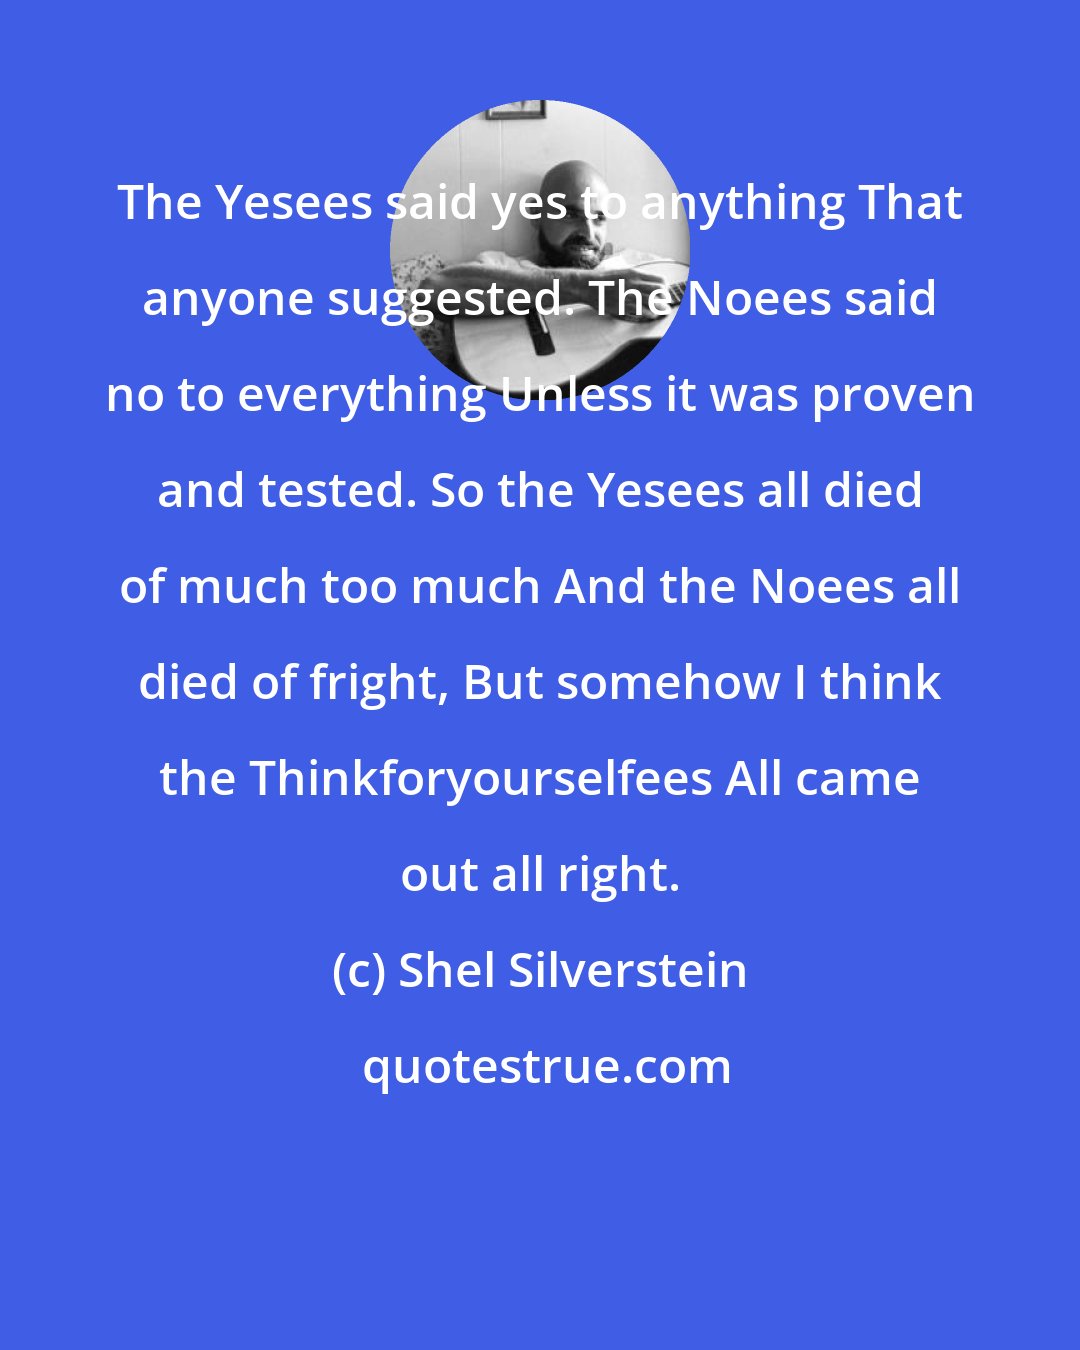 Shel Silverstein: The Yesees said yes to anything That anyone suggested. The Noees said no to everything Unless it was proven and tested. So the Yesees all died of much too much And the Noees all died of fright, But somehow I think the Thinkforyourselfees All came out all right.